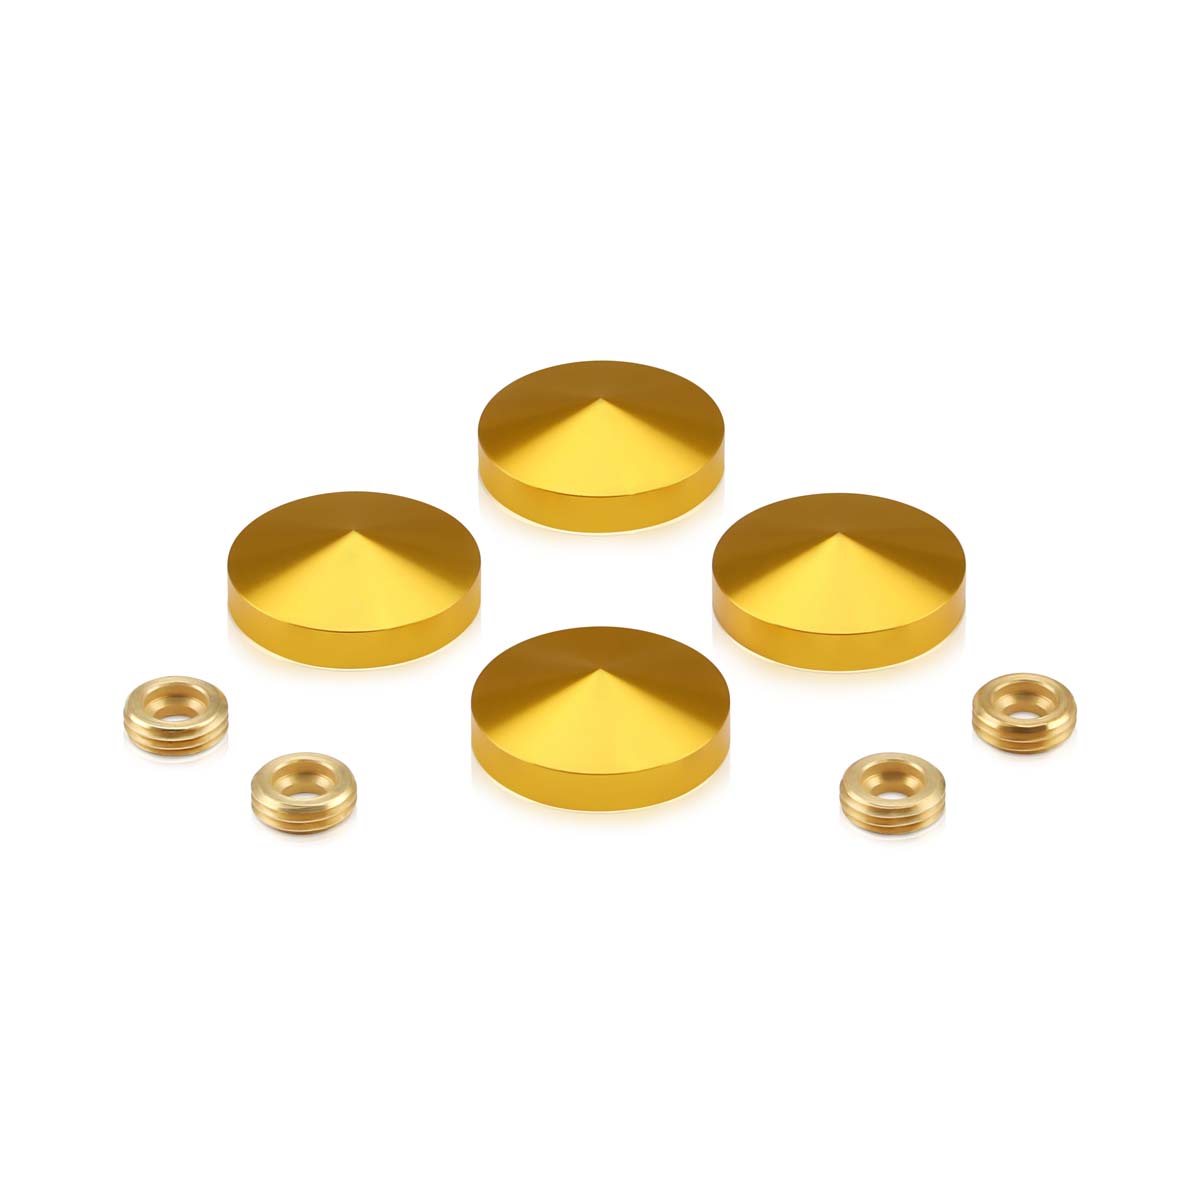 Set of 4 Conical Screw Cover, Diameter: 1'', Aluminum Gold Anodized Finish (Indoor or Outdoor Use)